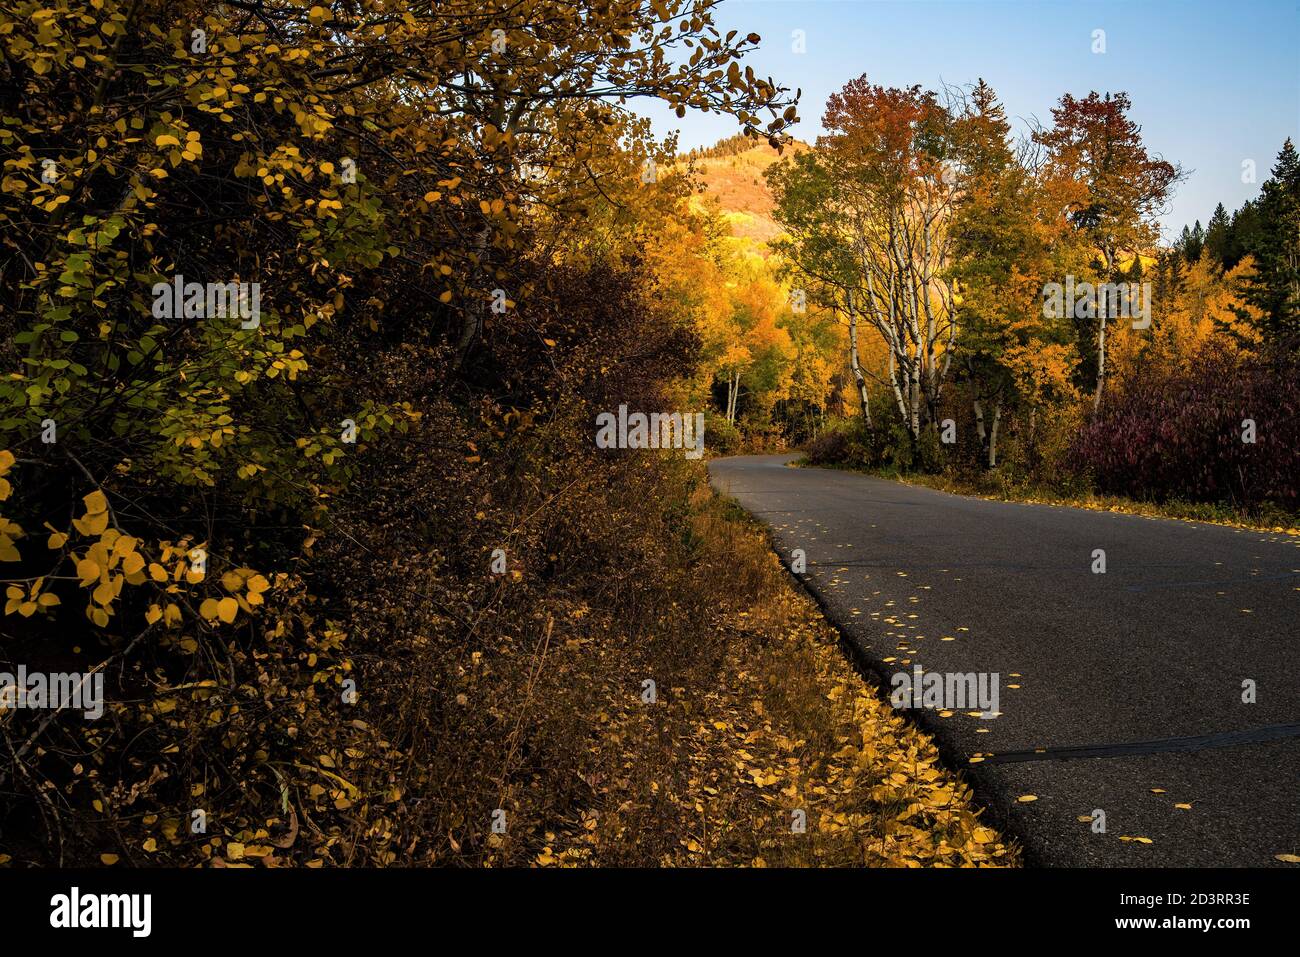 Narrow mountain road with Autumn colors.  Brightly colored trees and fallen leaves create visual interest in a mountain setting. Stock Photo